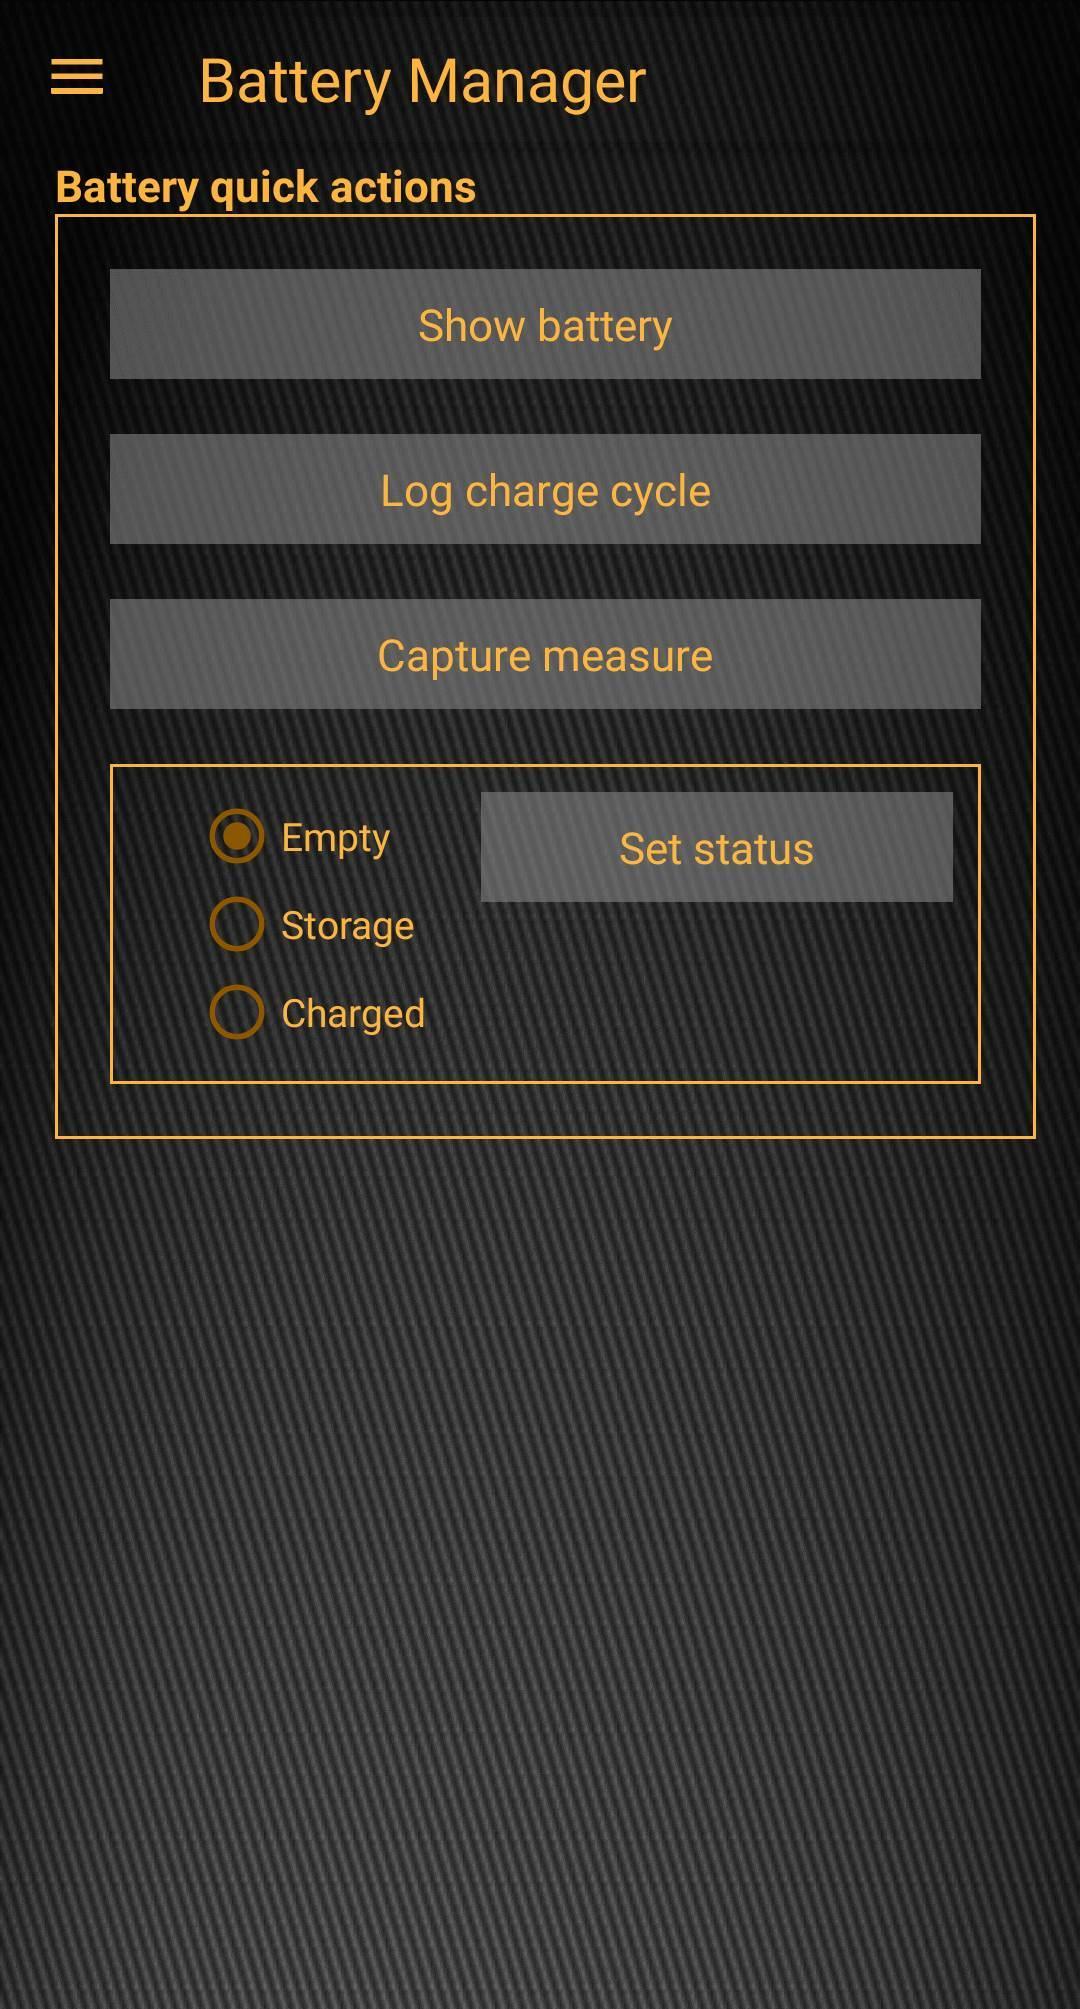 Battery manager